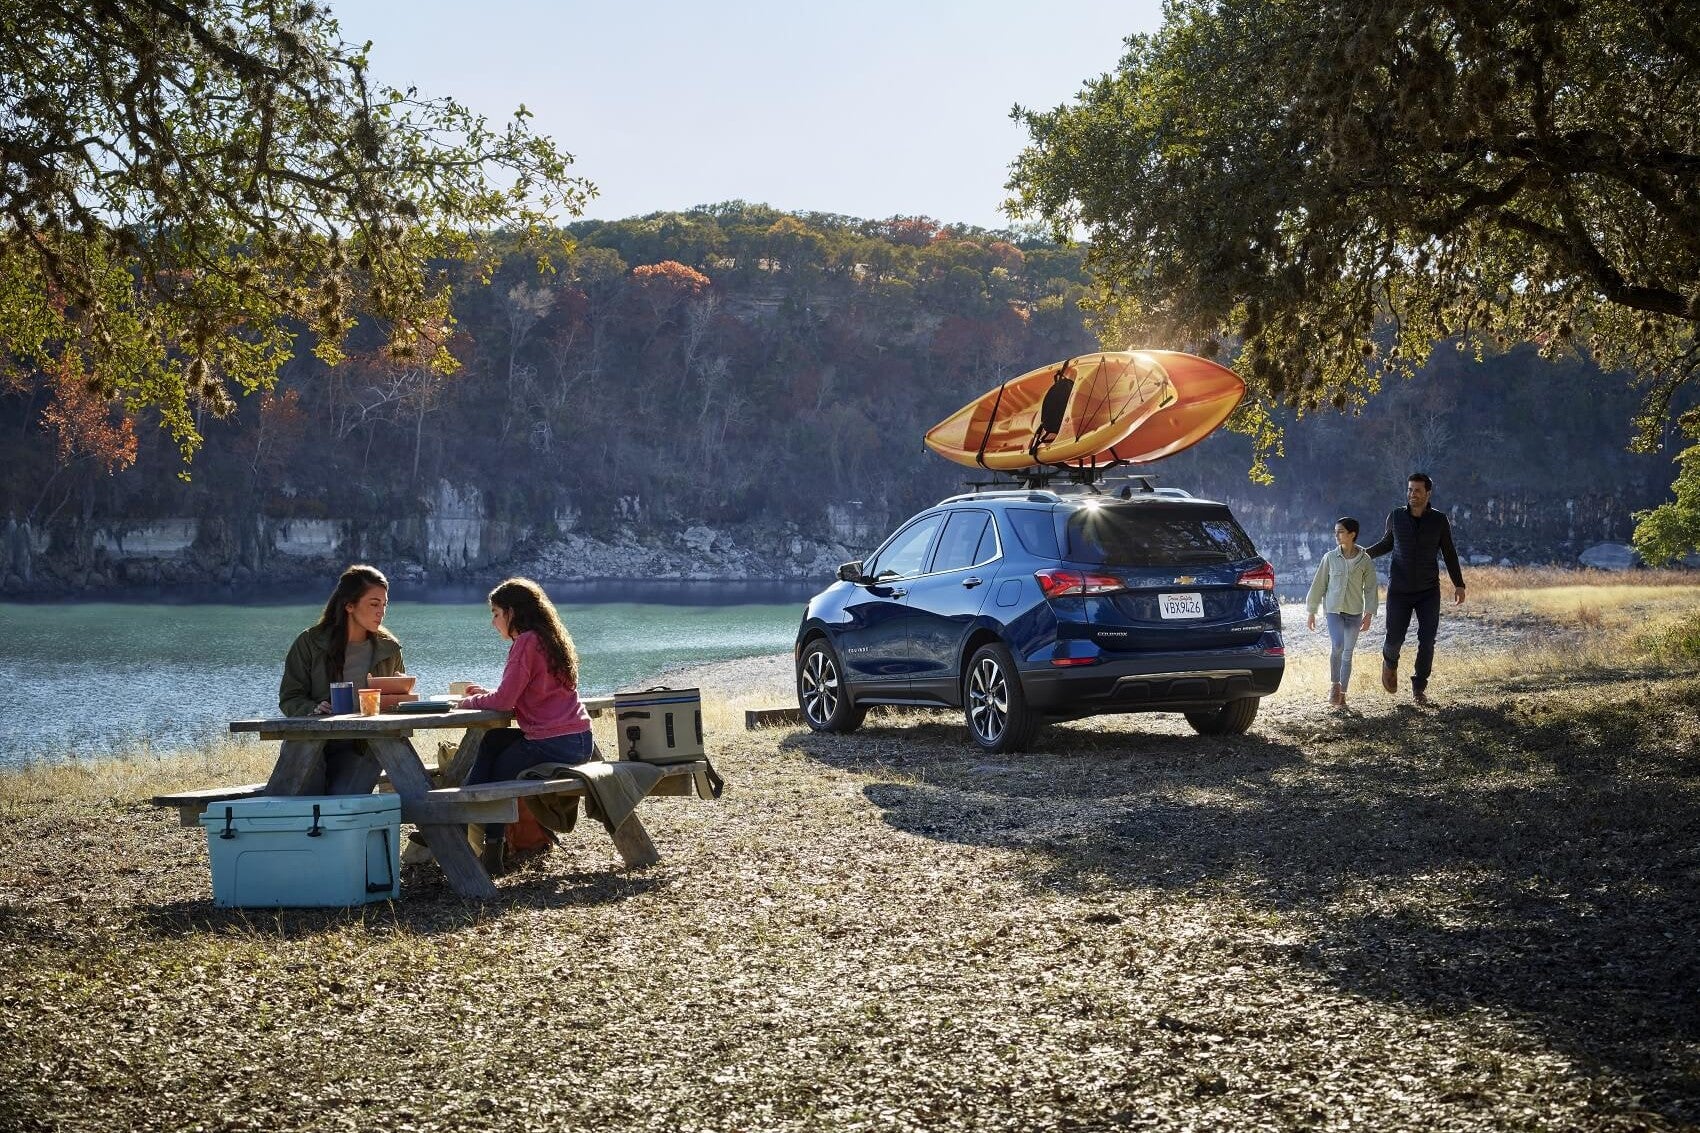 family camping with a chevy blazer. the blazer has an orange kayak on top and is parked in front of a quarry